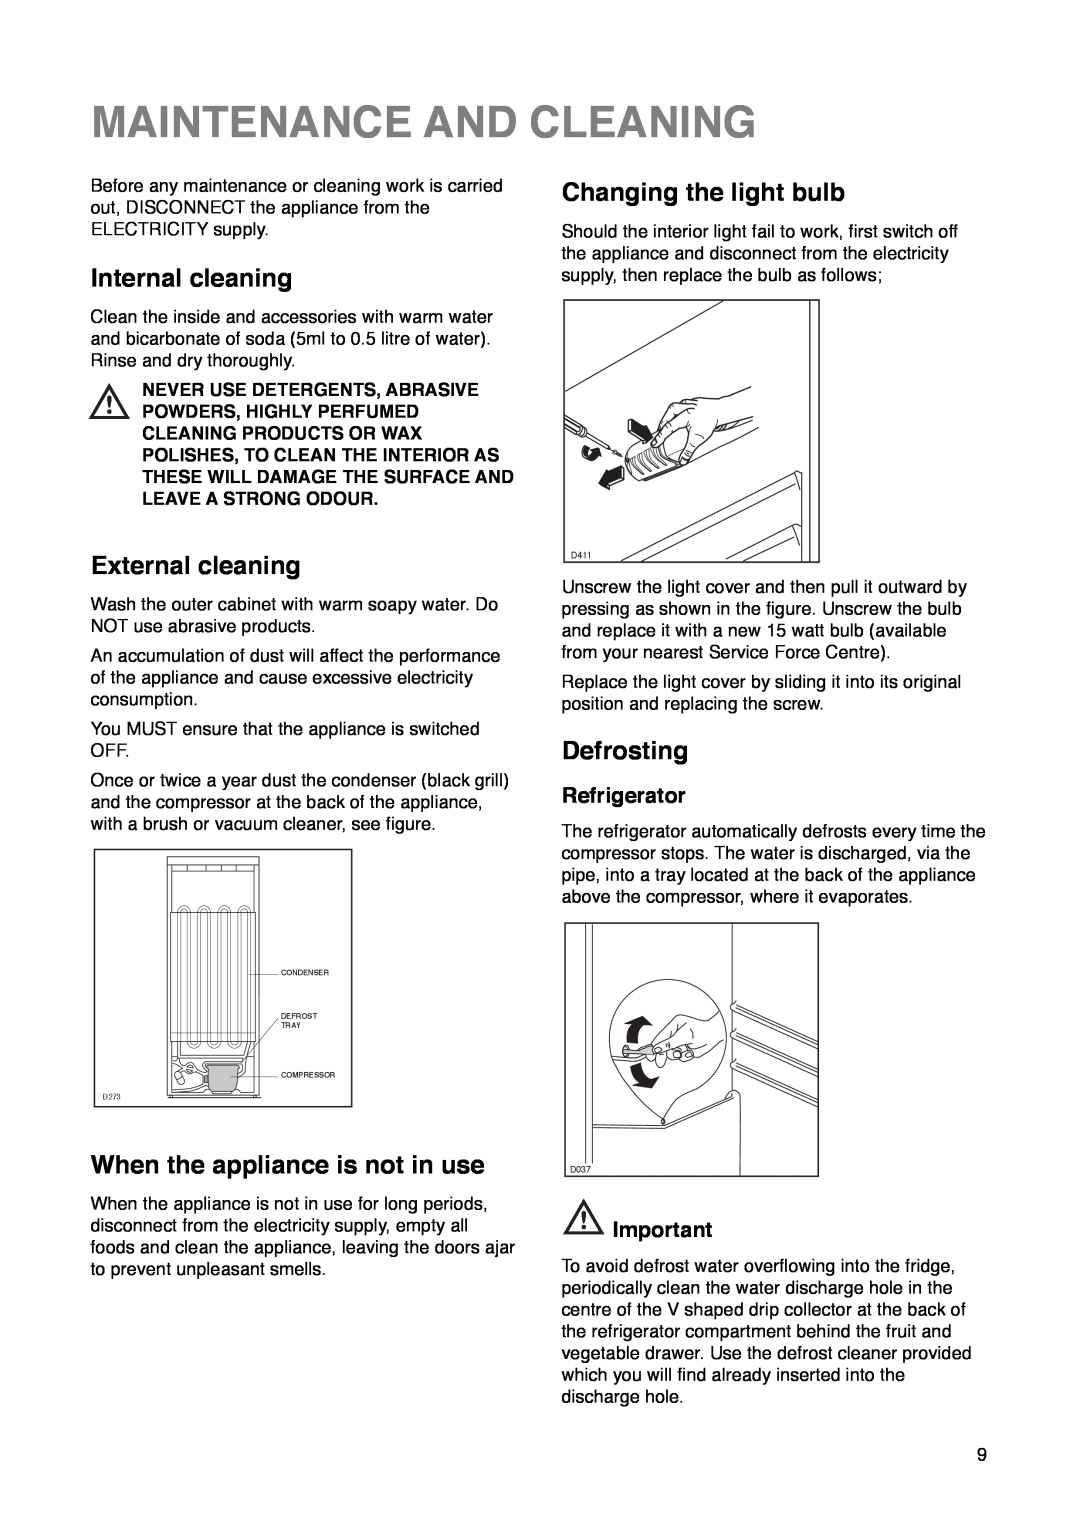 Zanussi ZK 57/38 R manual Maintenance And Cleaning, Internal cleaning, External cleaning, When the appliance is not in use 